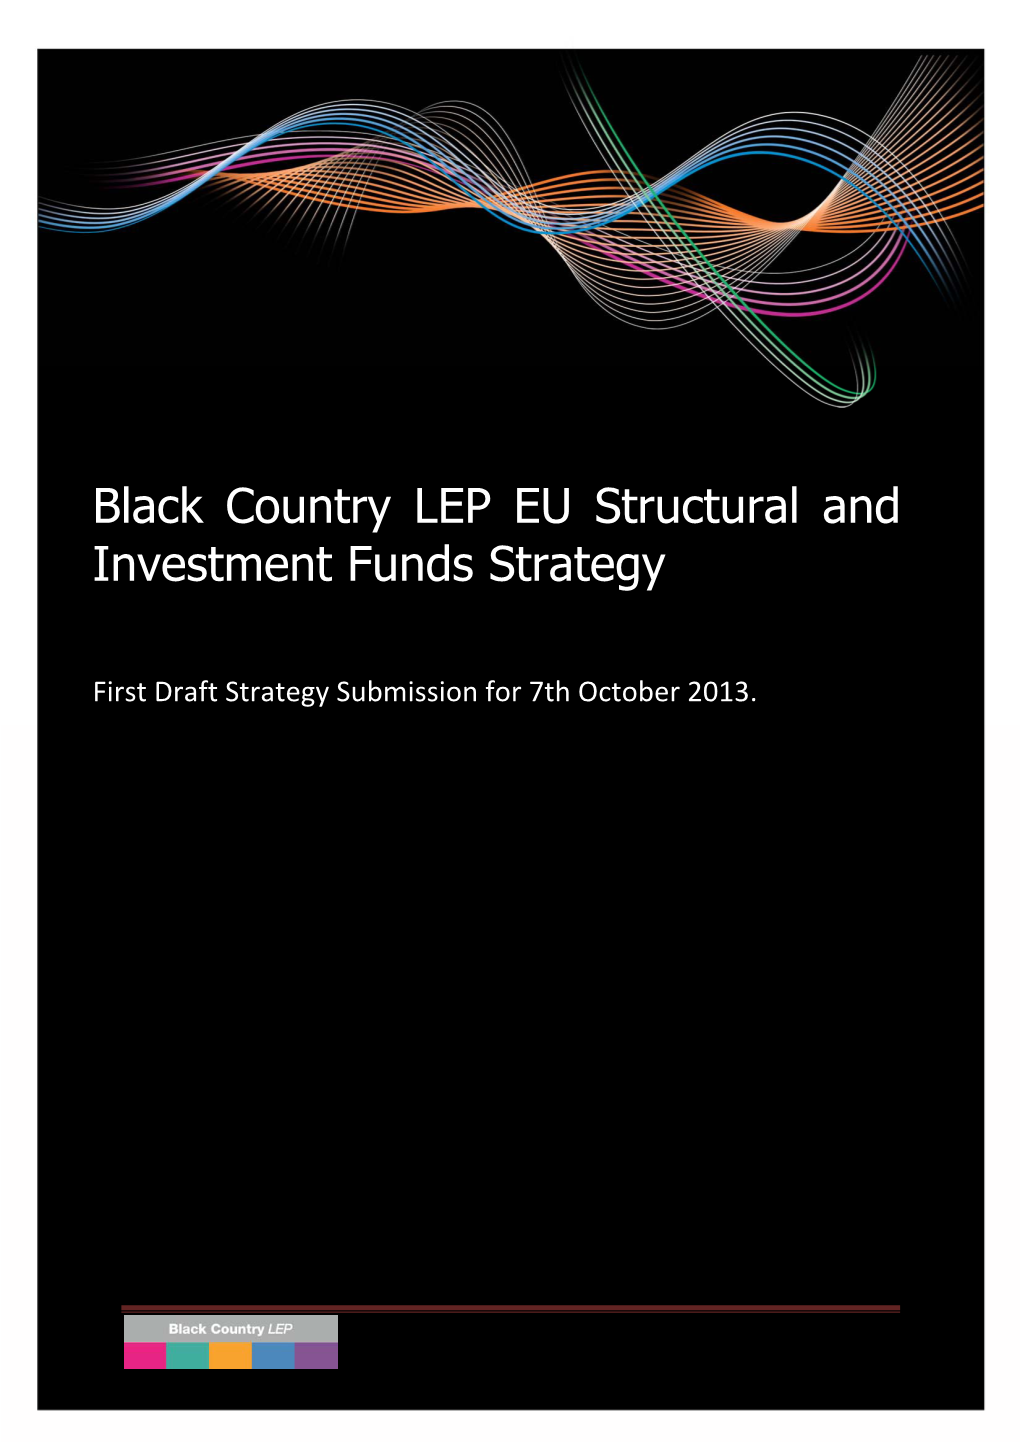 Black Country LEP EU Structural and Investment Funds Strategy